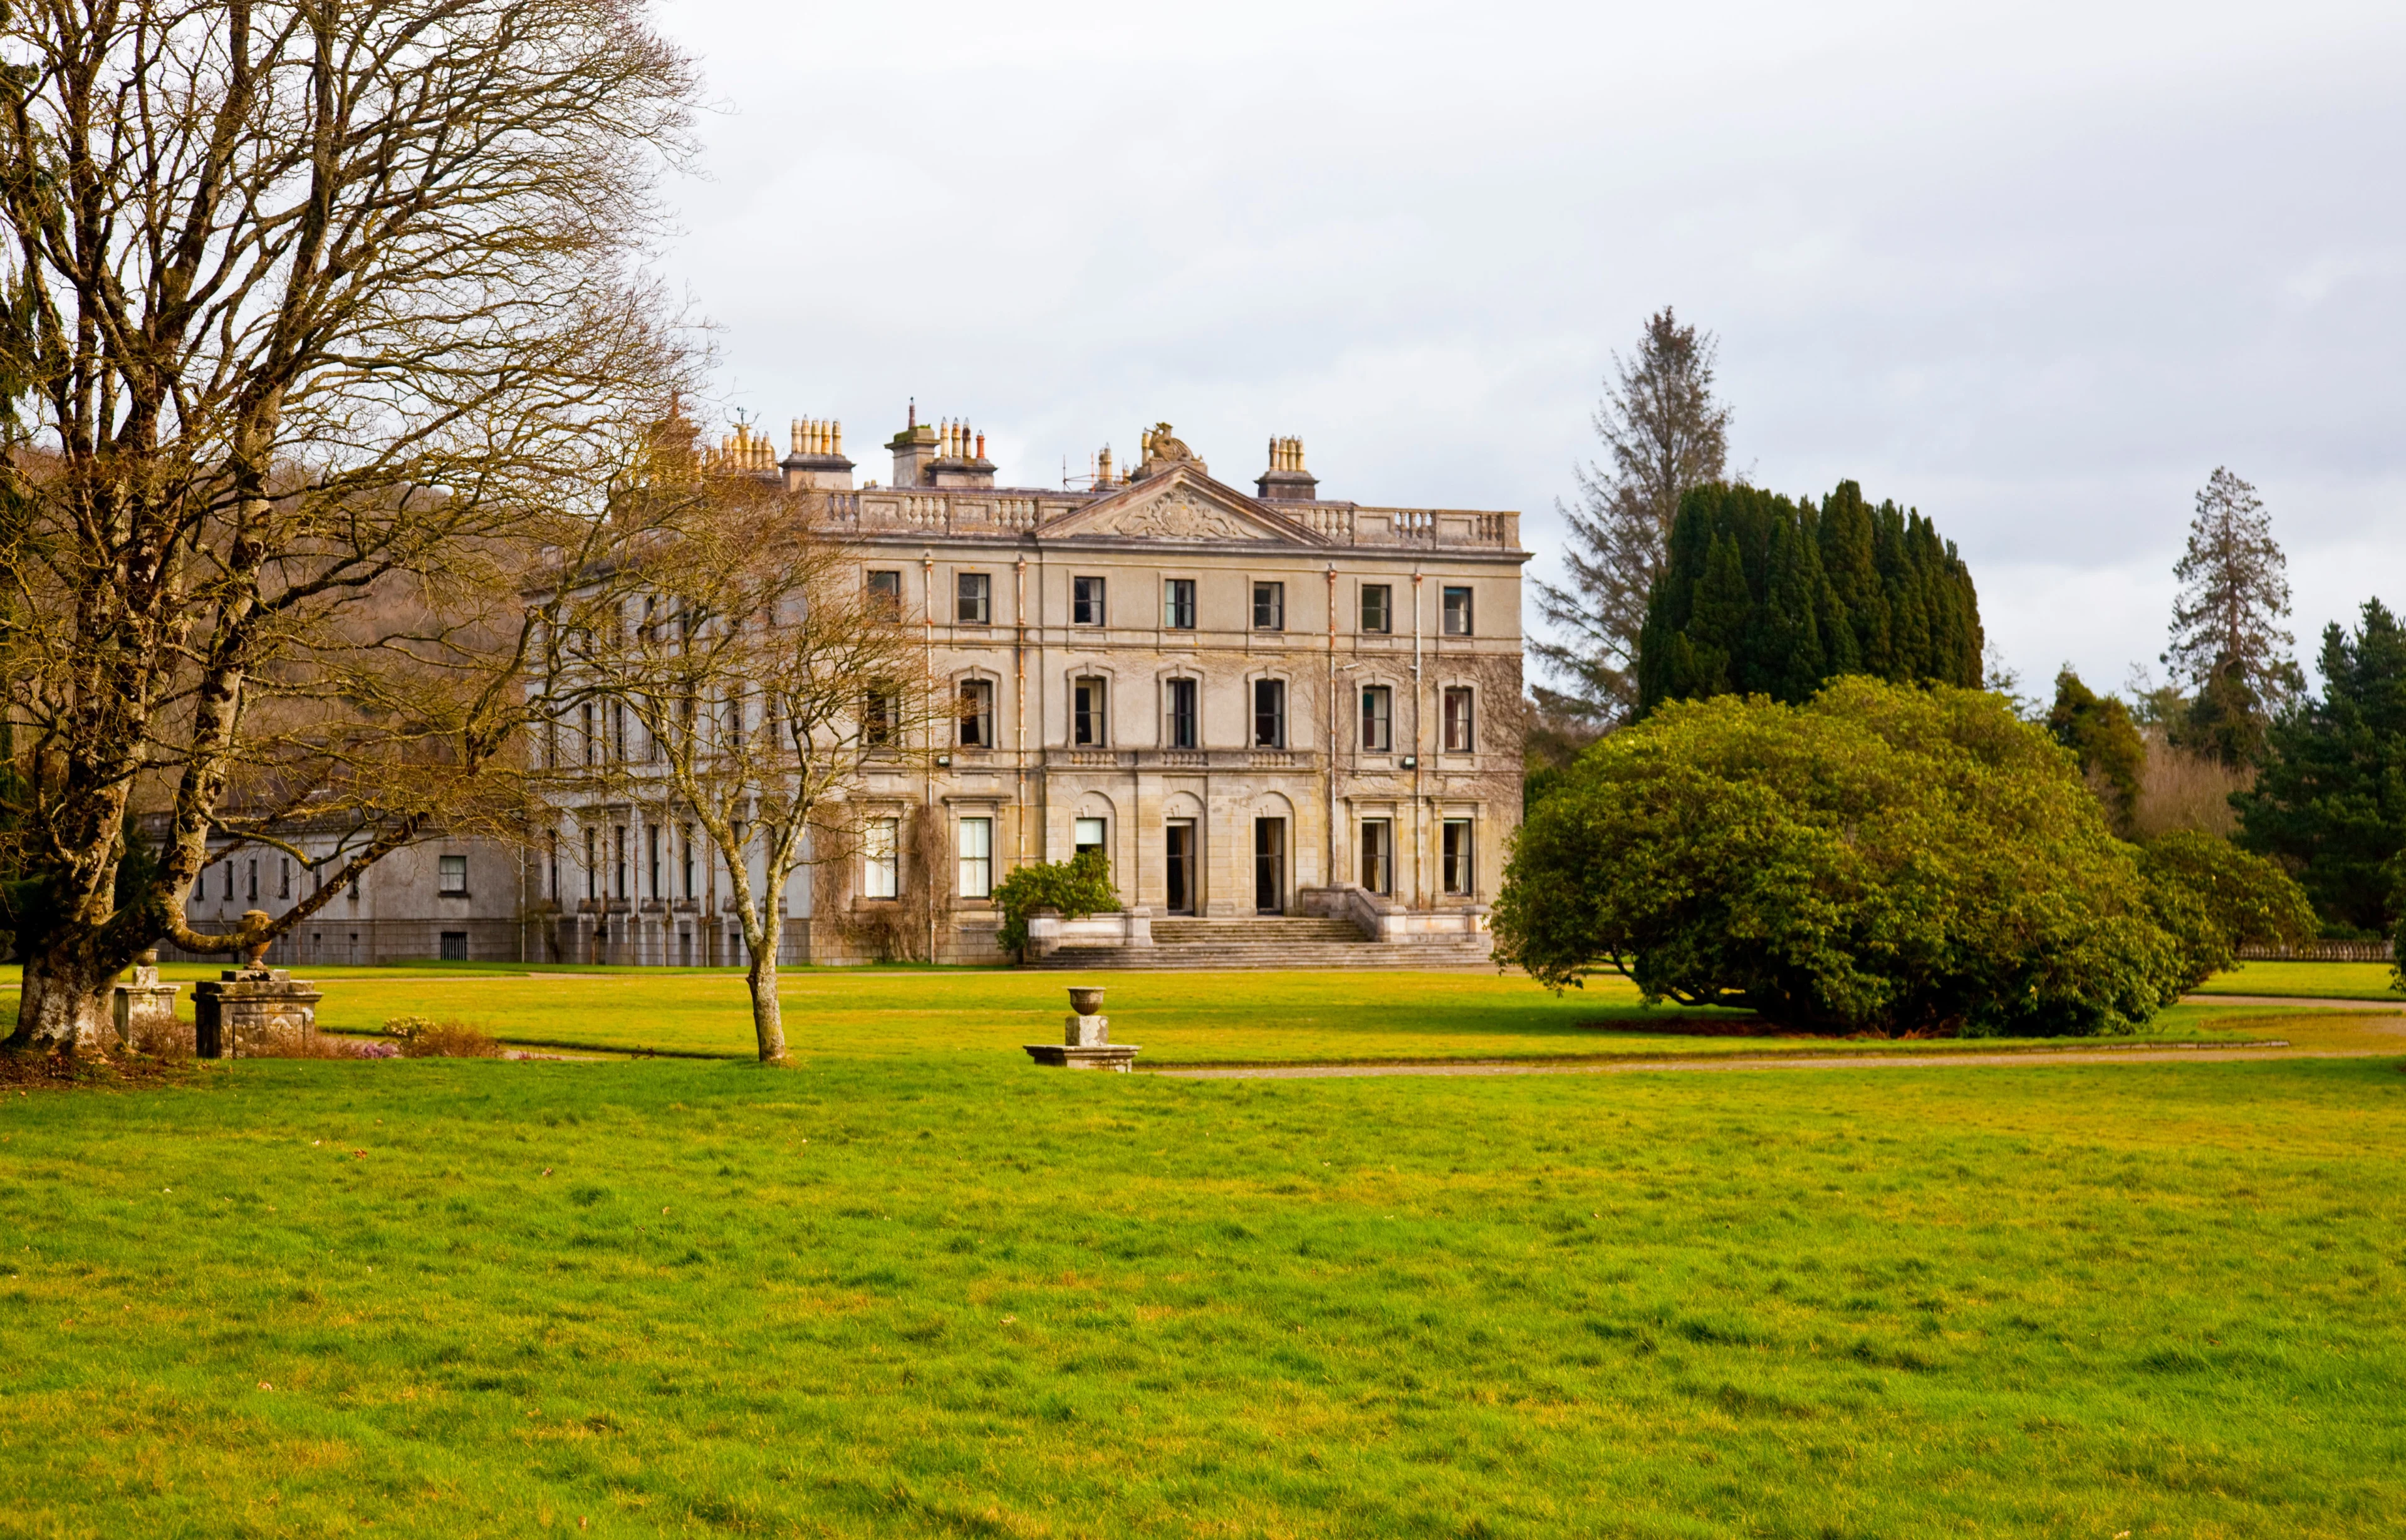 2853-curraghmore-house-with-lawn.jpg